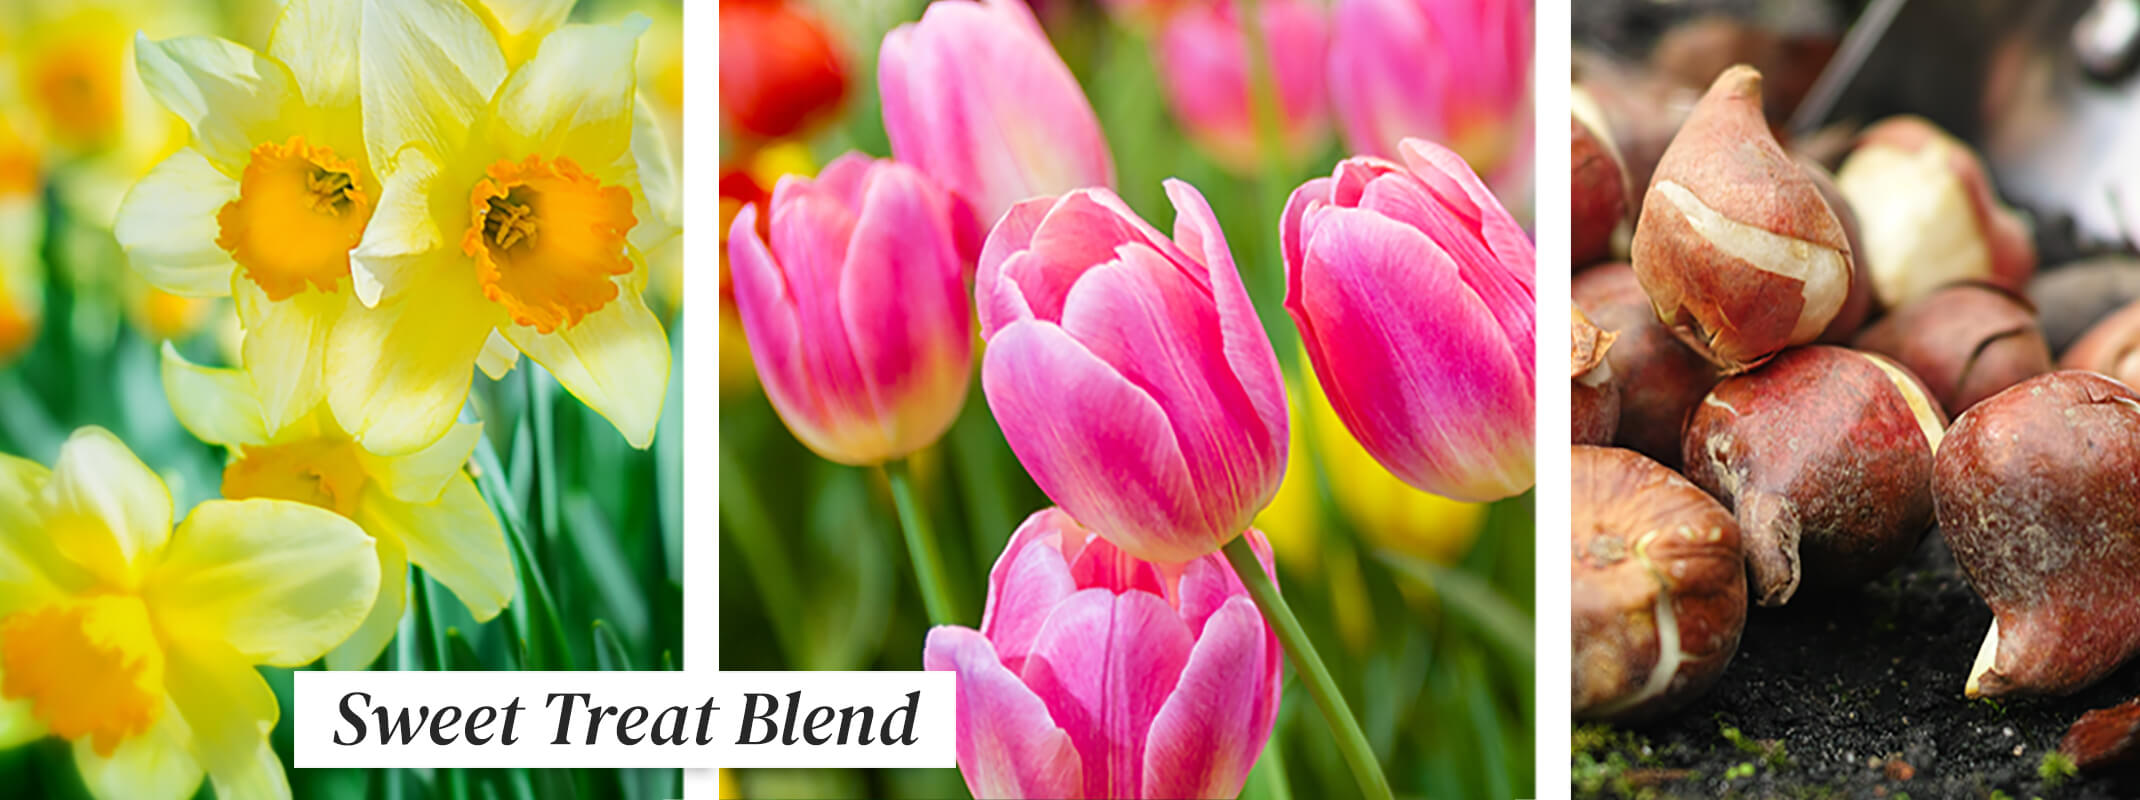 three images of spring flowering bulbs with the first image a daffodil already blooming in spring, the second image of a pink tulip blooming and the third image of tulip bulbs the image has the words sweet treat blend on it